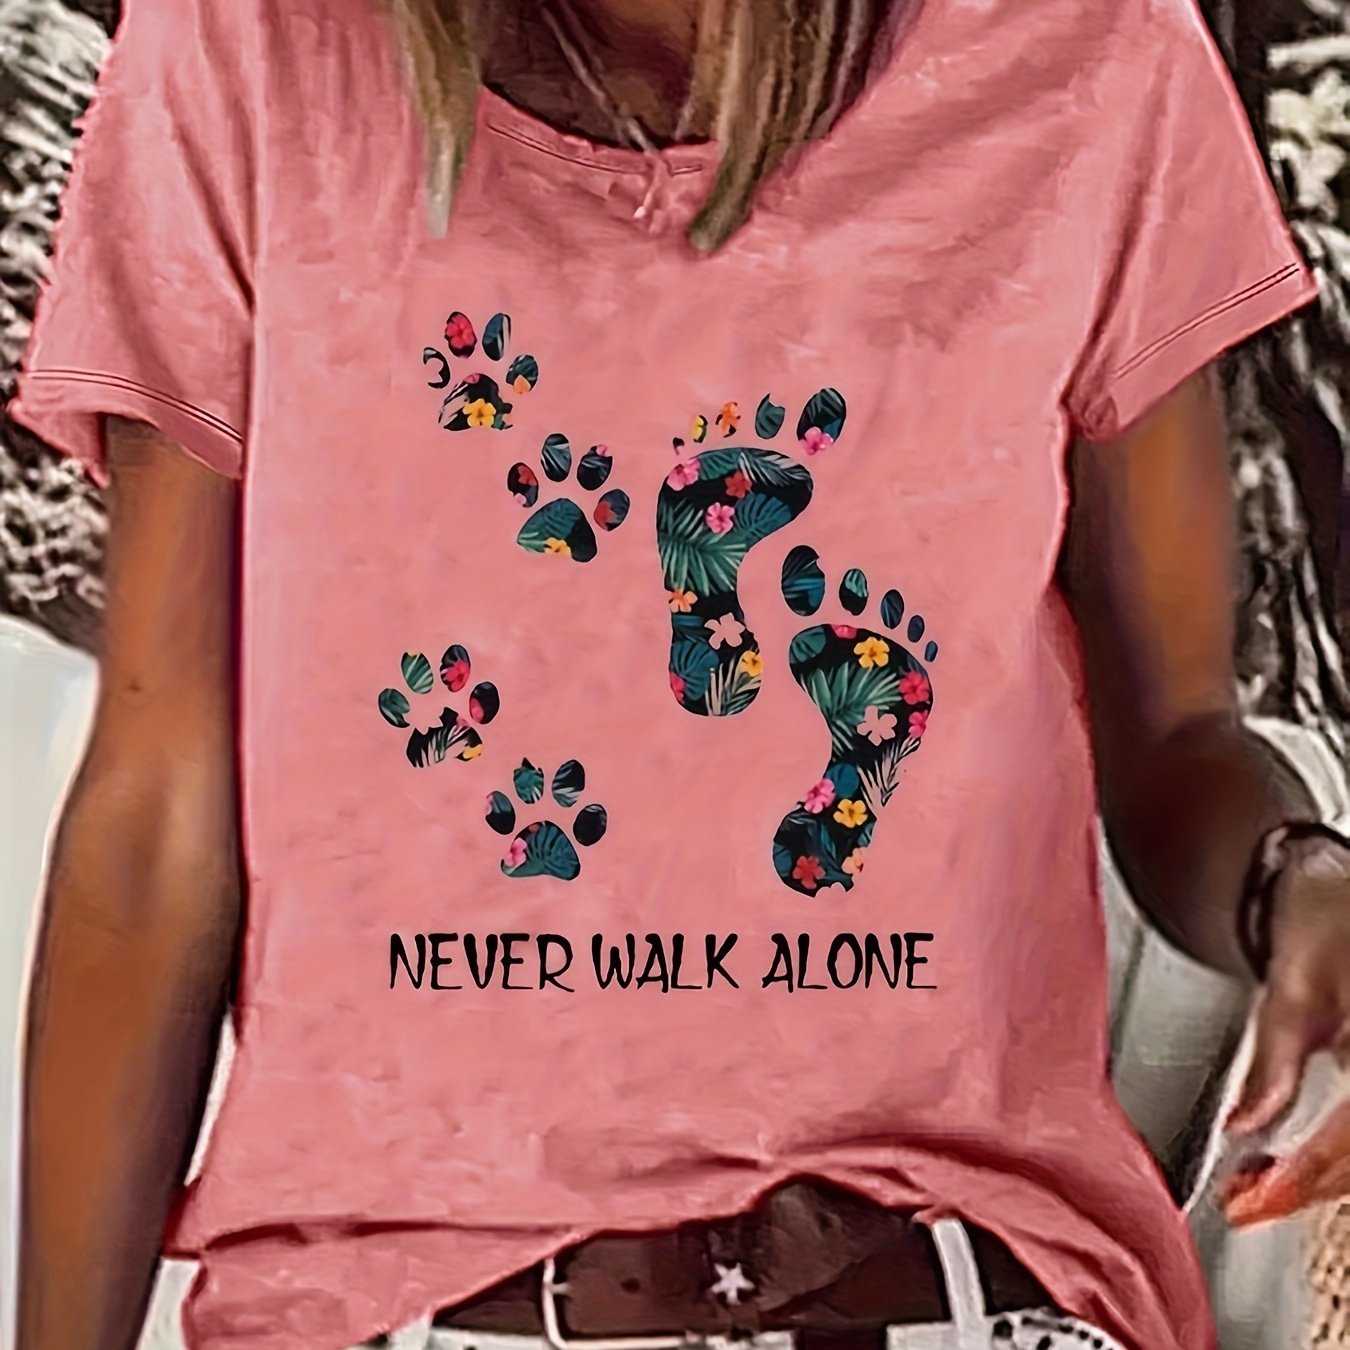 

Footprint & Paw Print T-shirt, Casual Short Sleeve Crew Neck Top For Spring & Summer, Women's Clothing